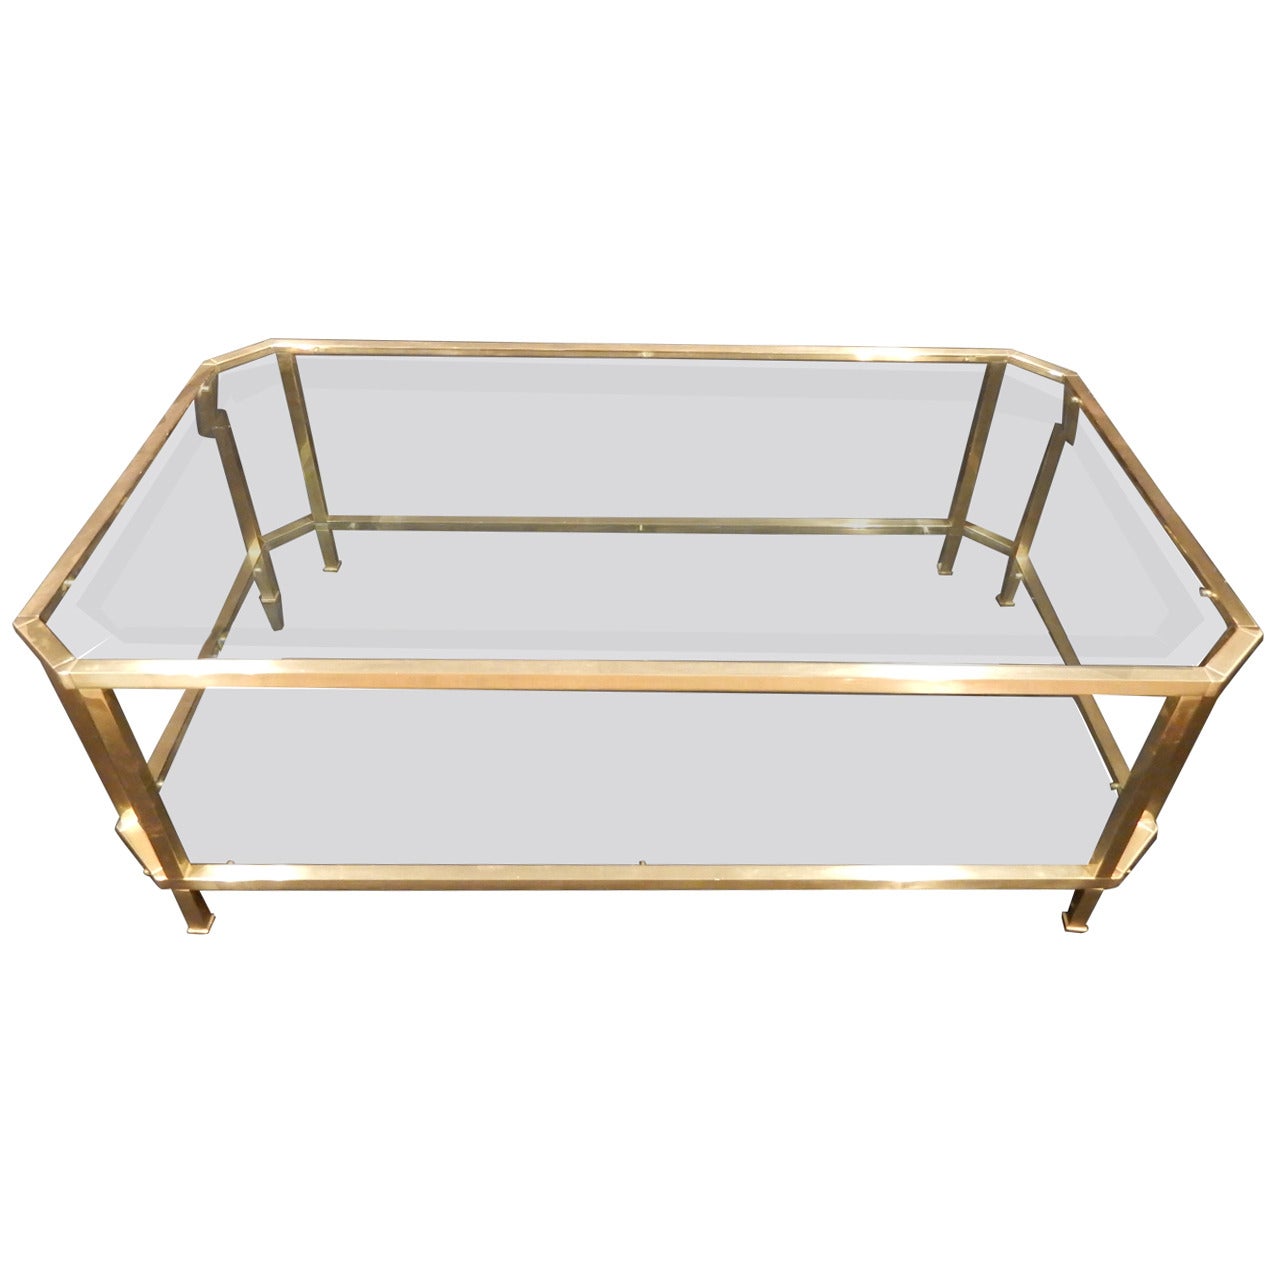 Quality French Brass Vintage Coffee Table For Sale